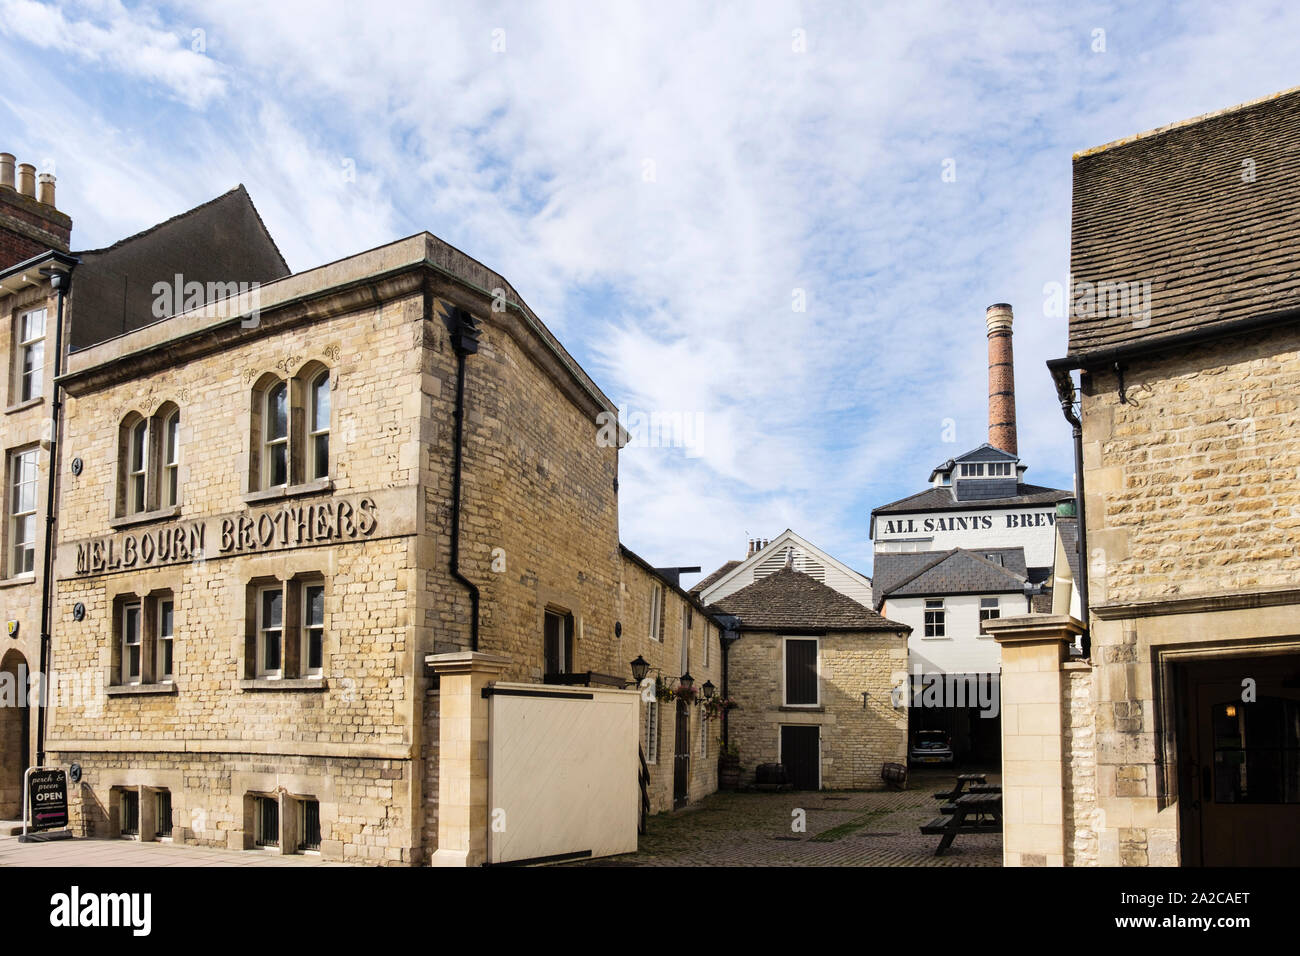 Melbourn Bros’ All Saints Brewery 1825 and pub in old limestone buildings. Stamford, Lincolnshire, England, UK, Britain Stock Photo